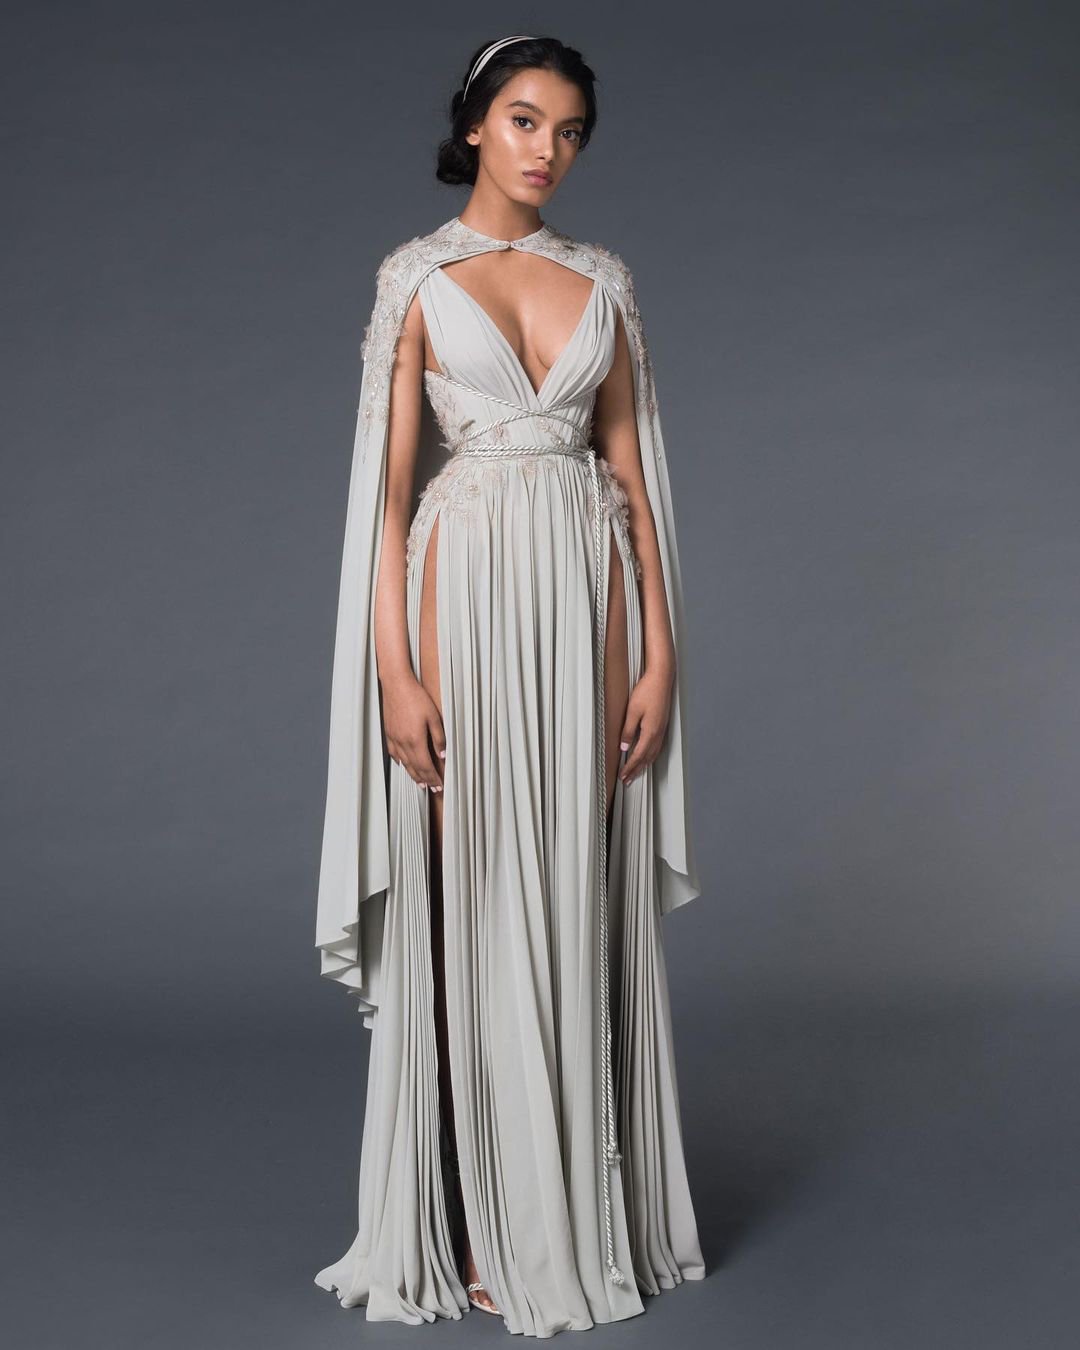  Greek Wedding Dress Code of the decade The ultimate guide 